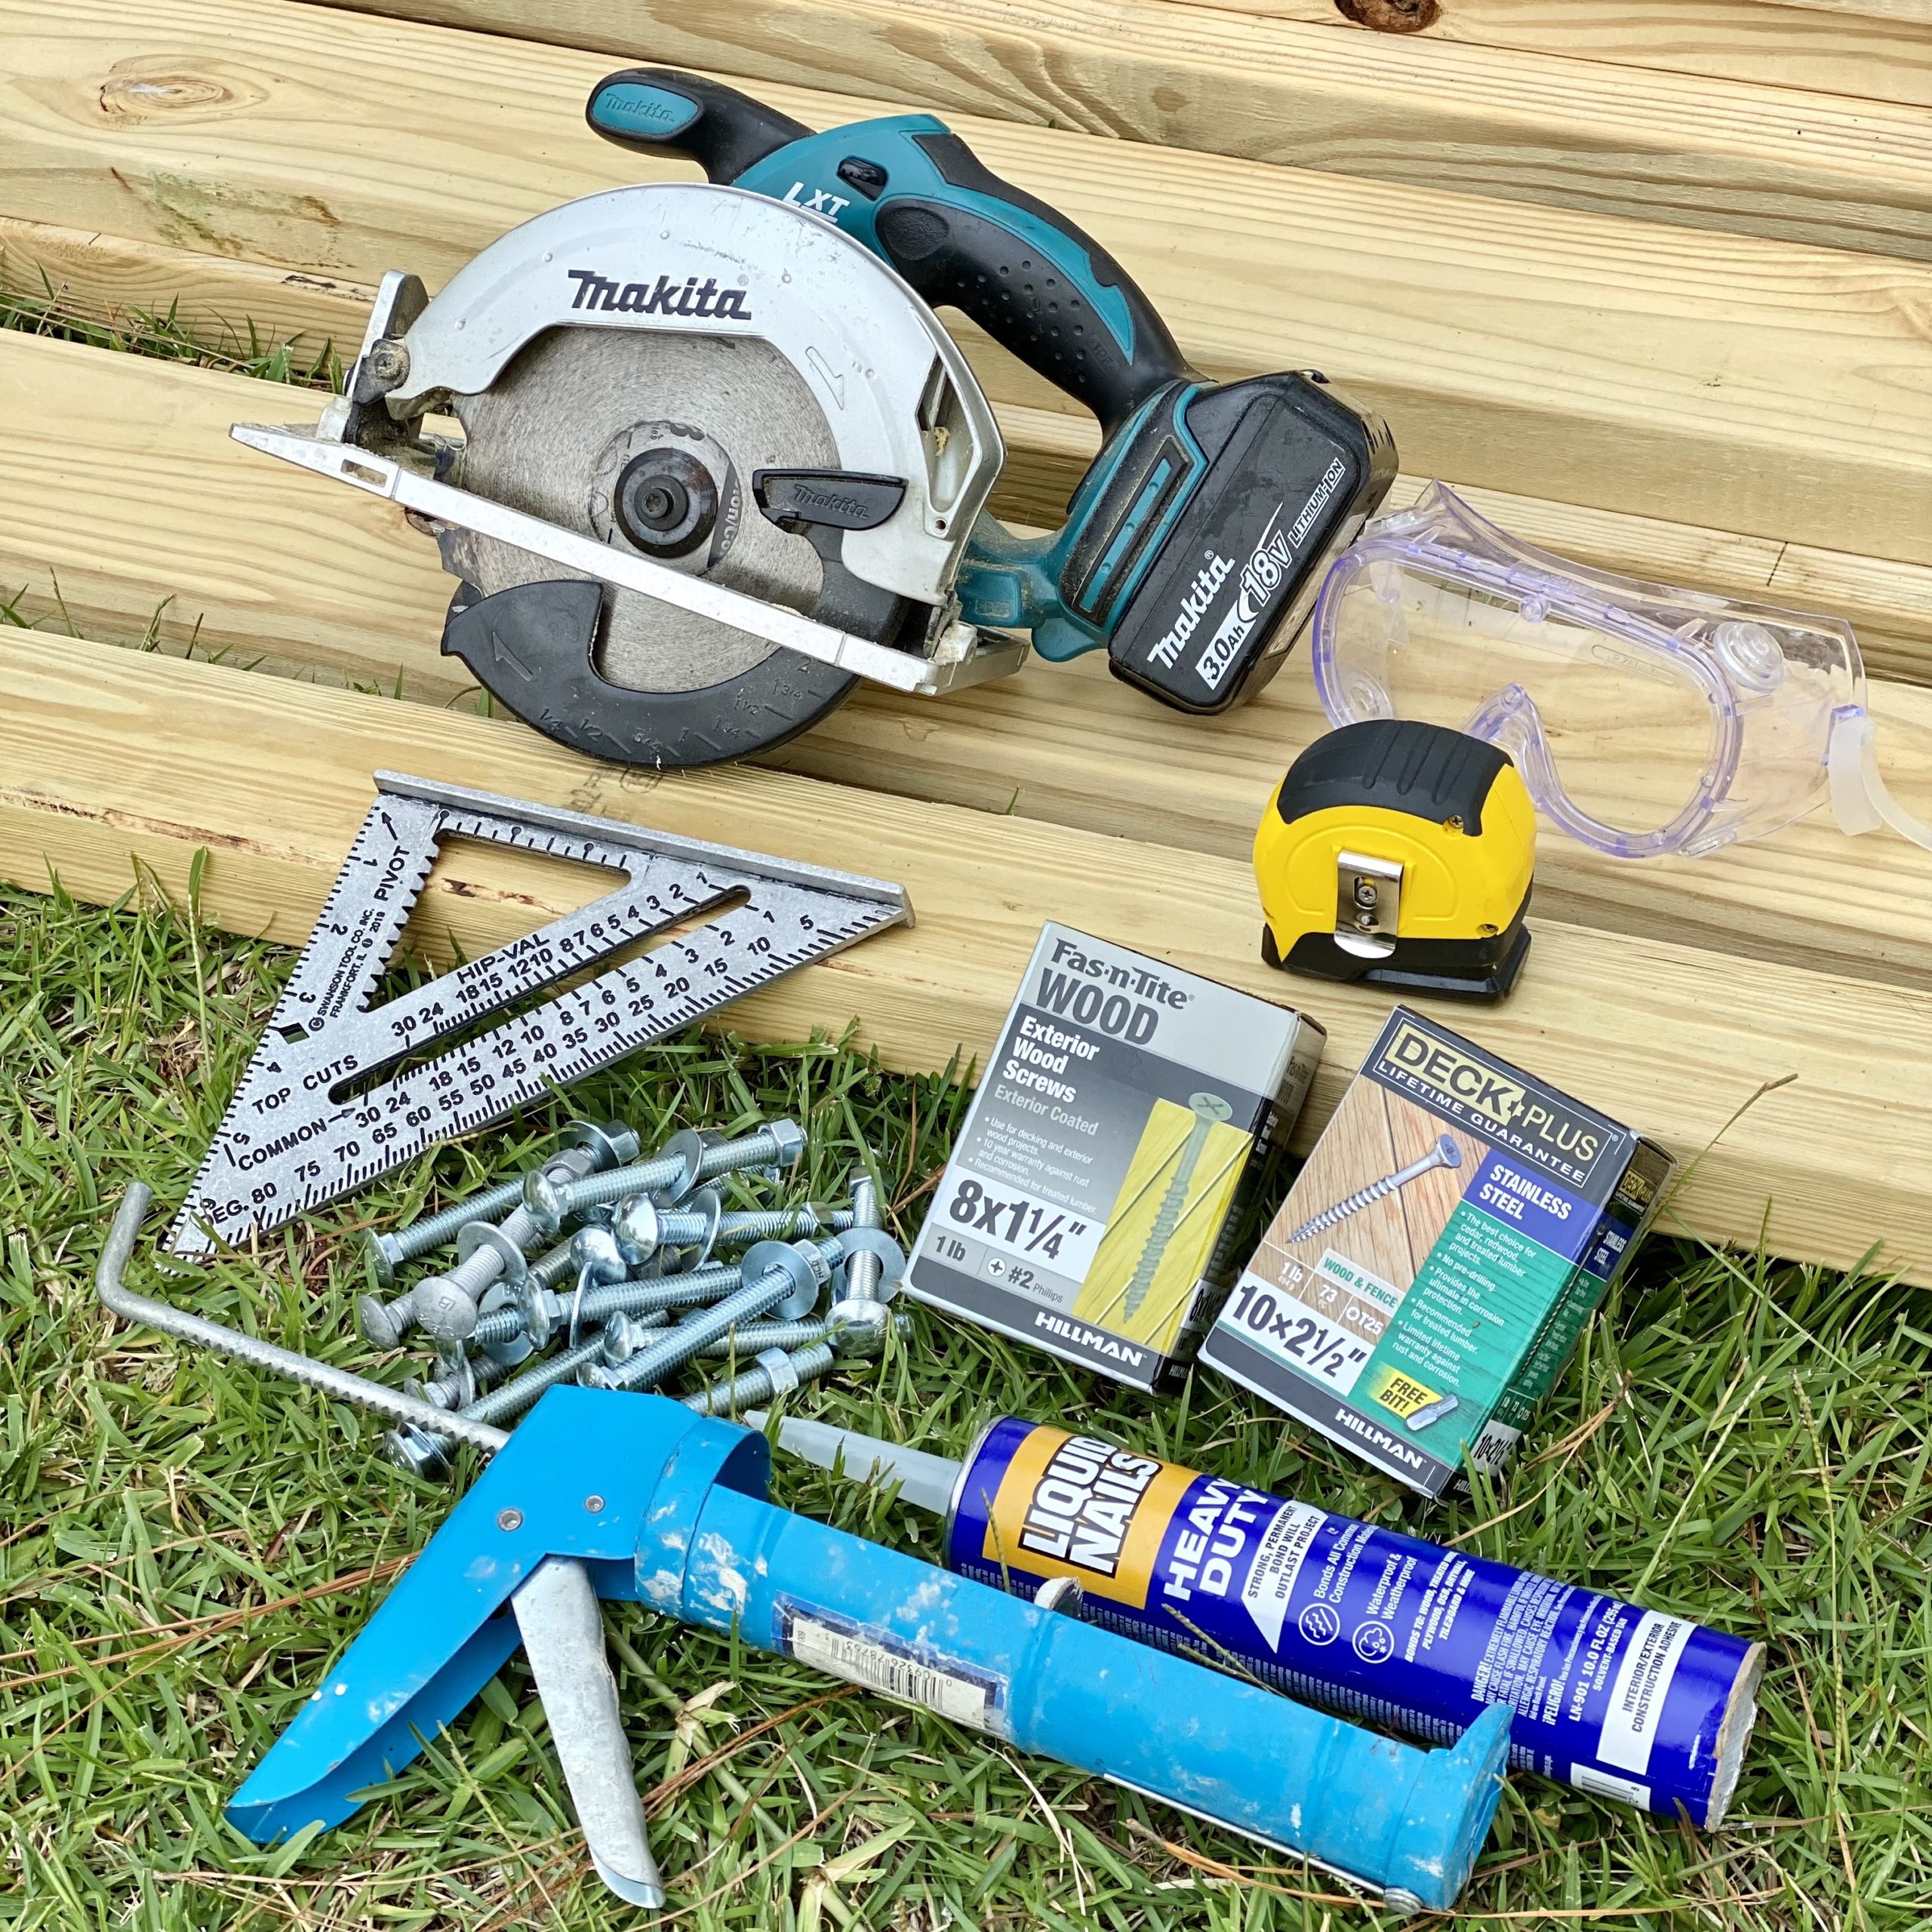 Materials and tools you need to build a picnic table including wood boards, saw, screws, and more.